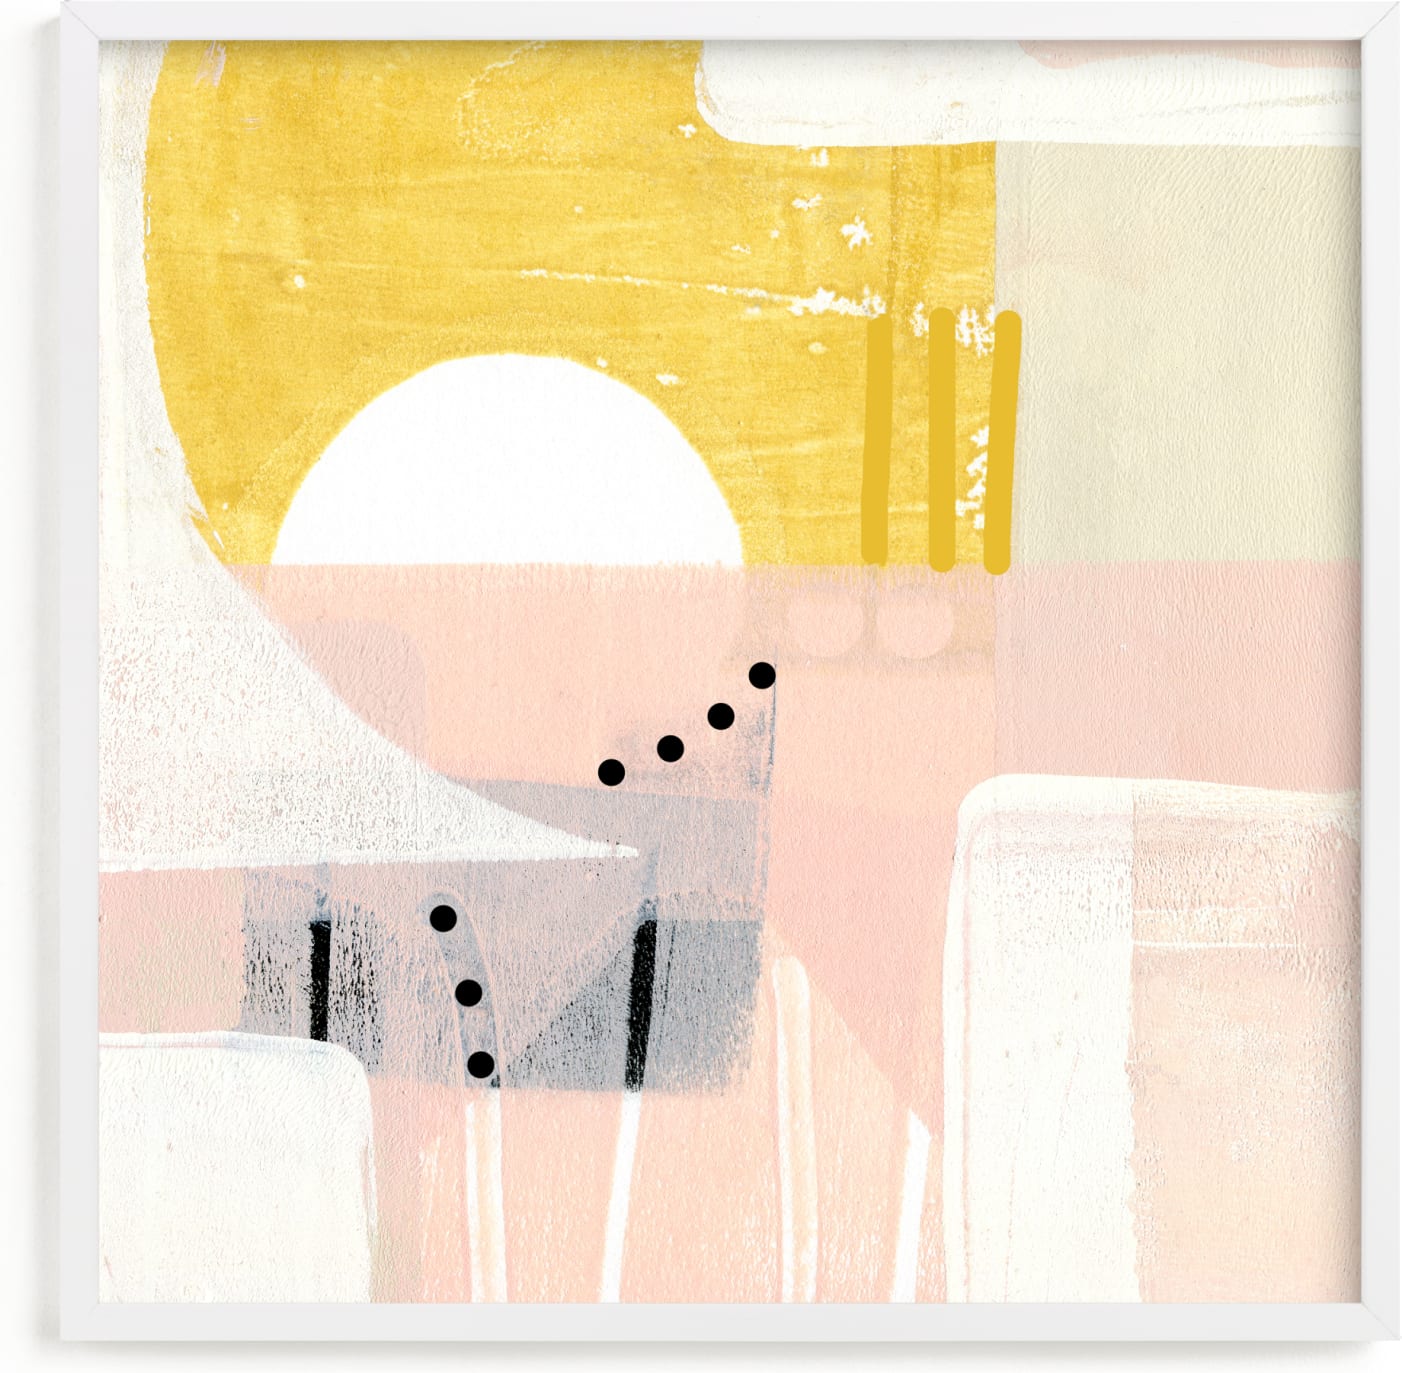 This is a white art by Jaqui Falkenheim called Sunny and dots I.